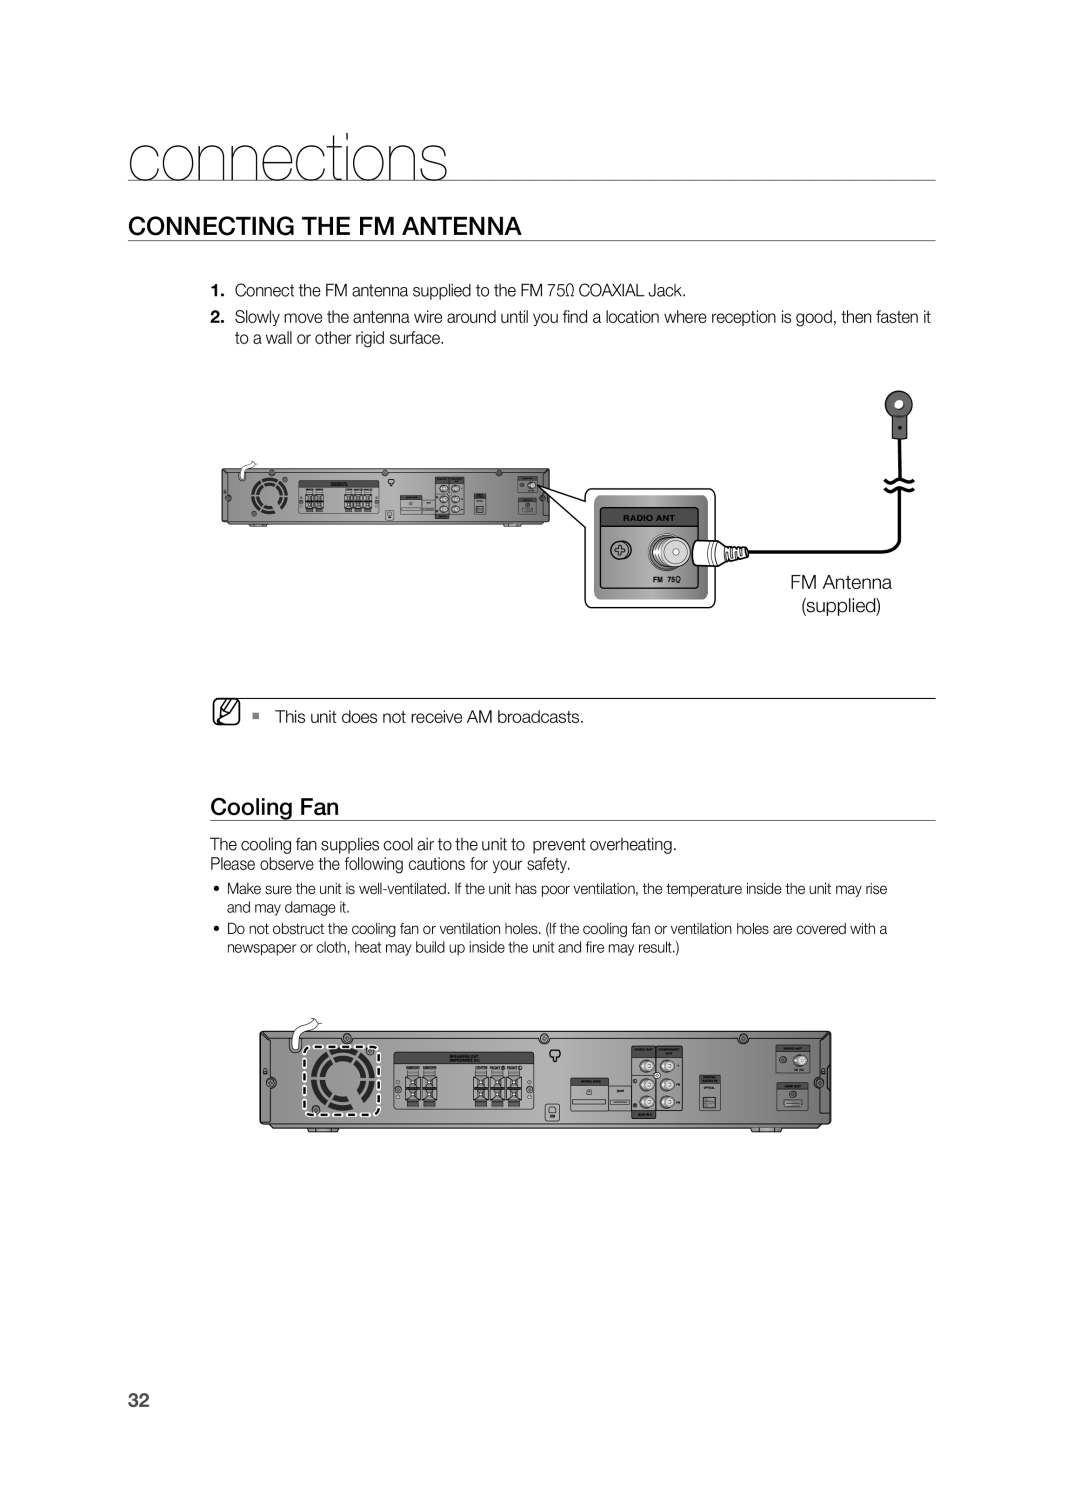 Samsung HT-TZ515 user manual Connecting the FM Antenna, connections, Cooling Fan 